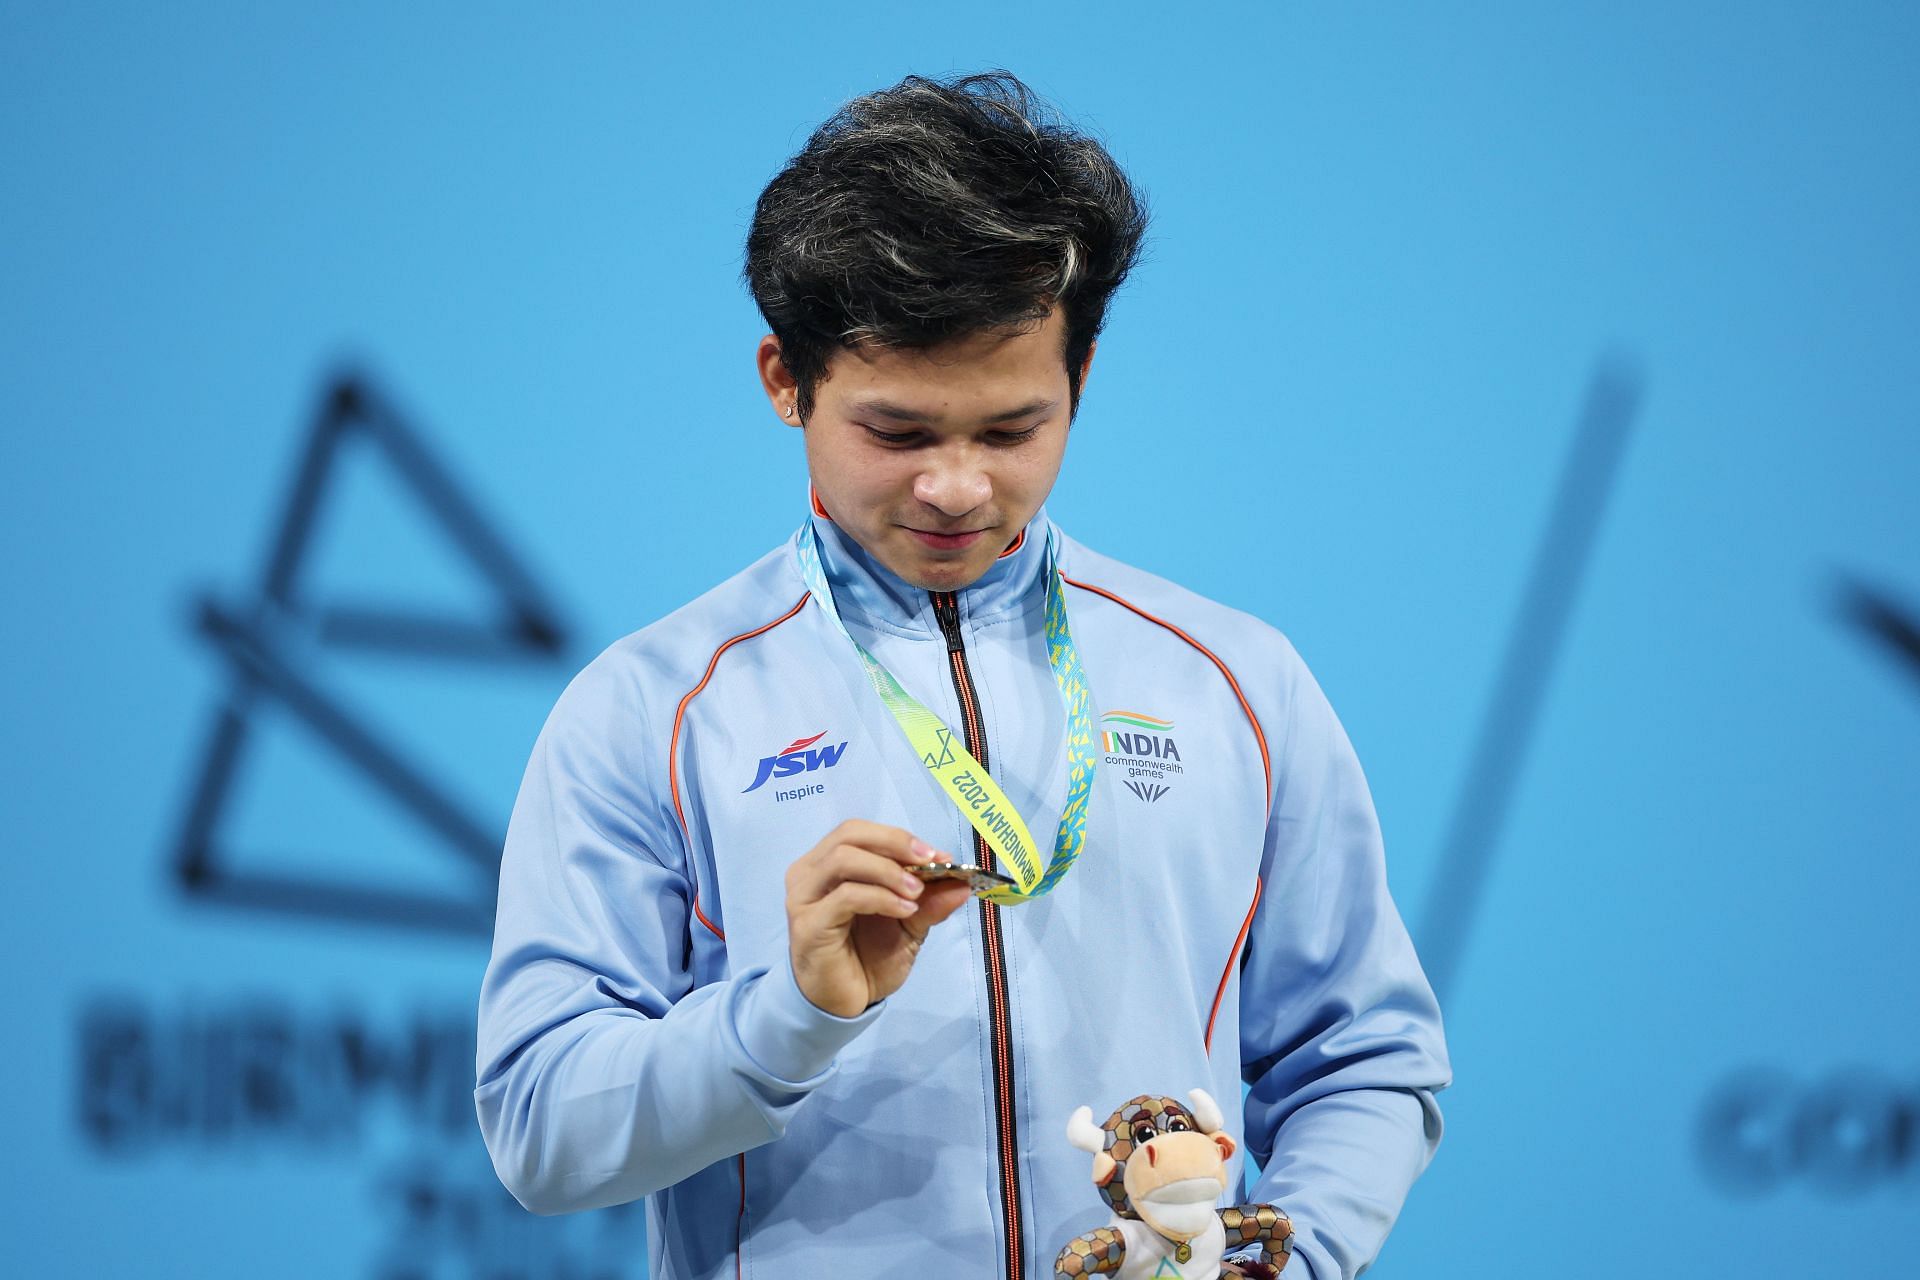 Weightlifting - Commonwealth Games: Gold medalist Lalrinnunga Jeremy of Team India